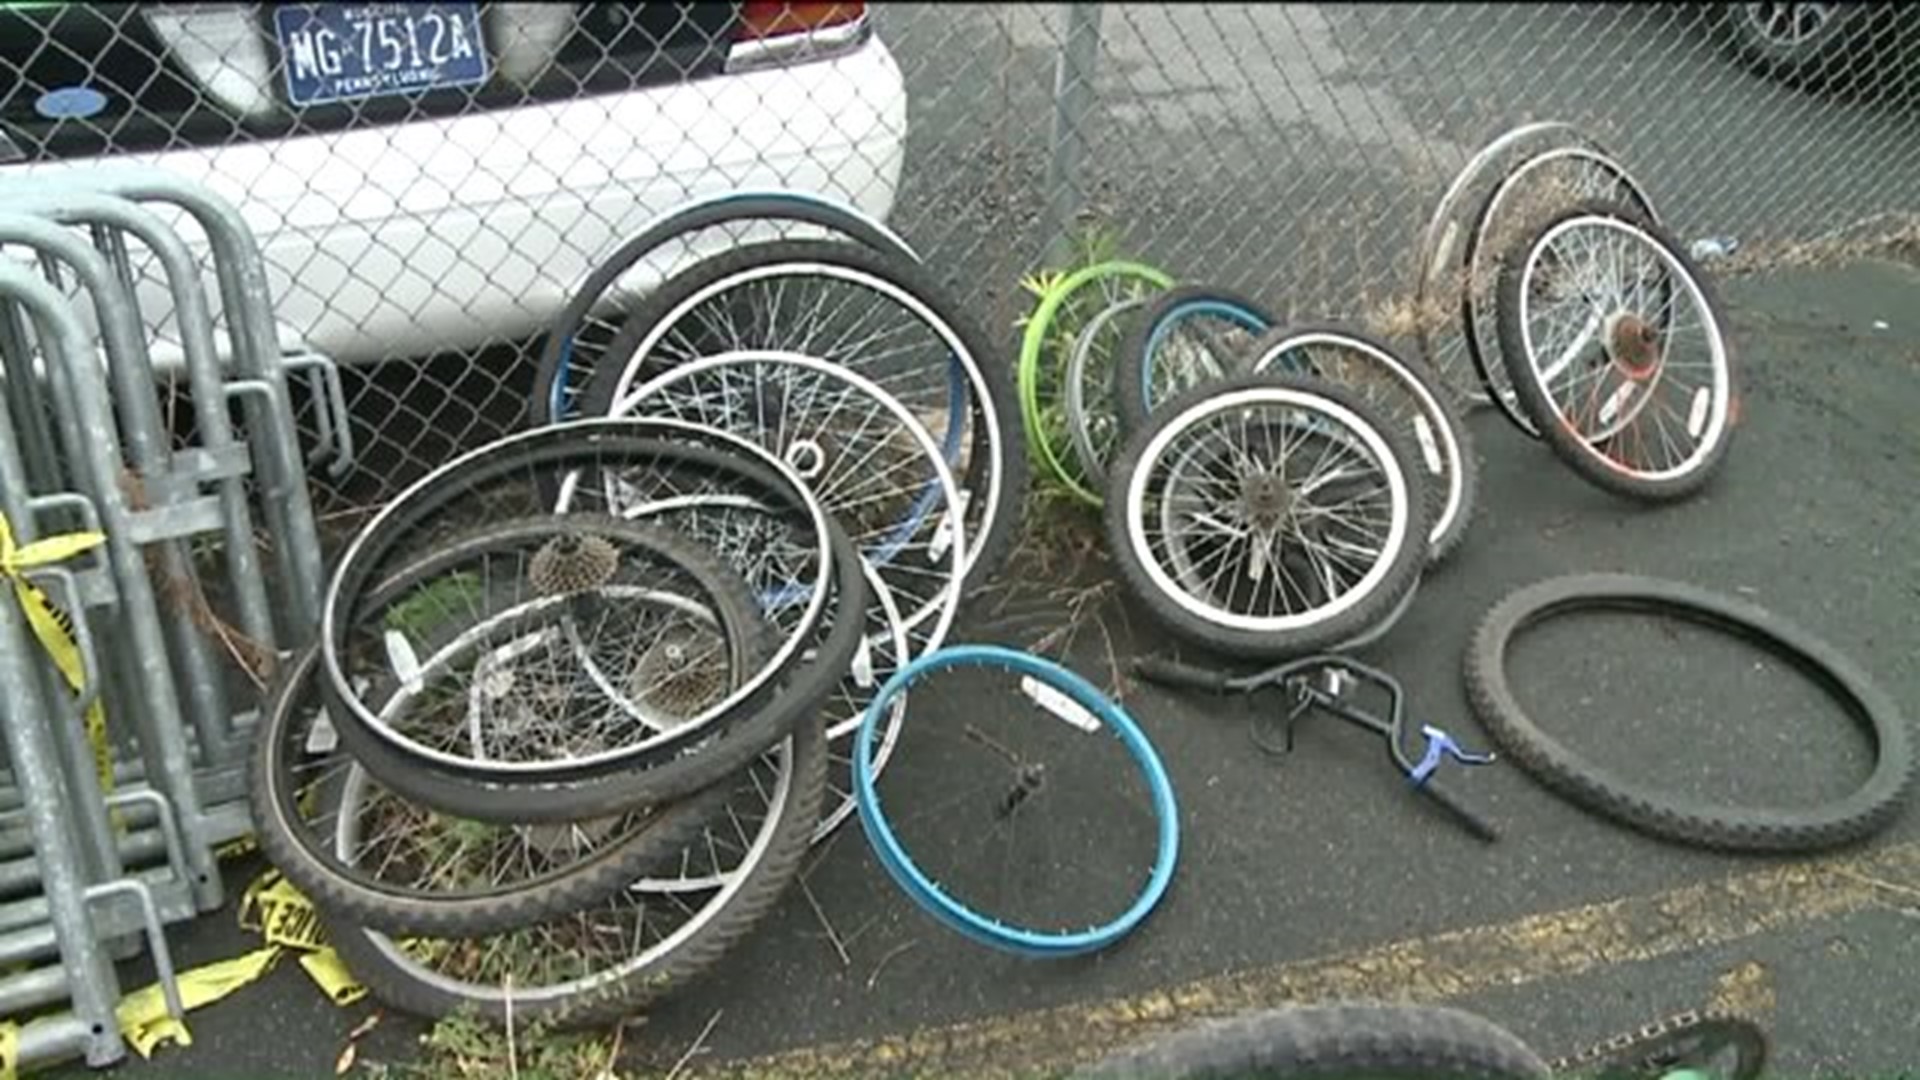 Juveniles Suspected of Running Bicycle 'Chop Shop'